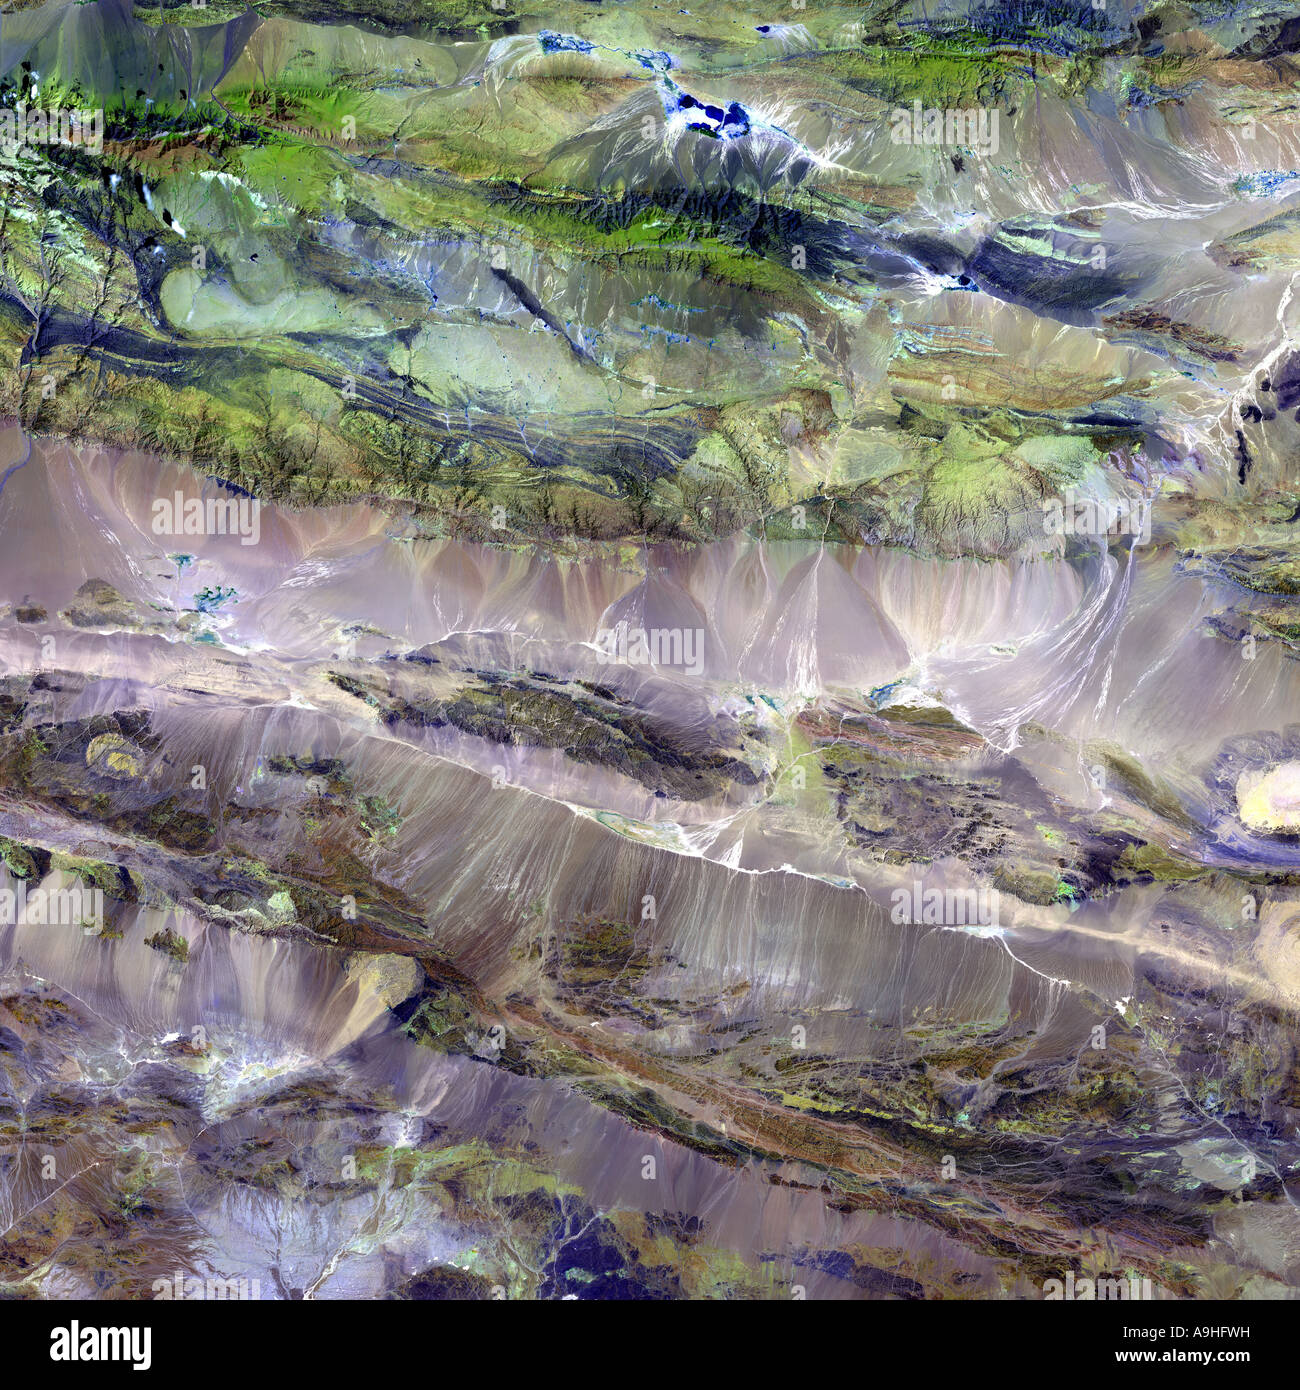 The Edrengiyn Nuruu between the Mongolian steppes and northern China as seen from Space Stock Photo